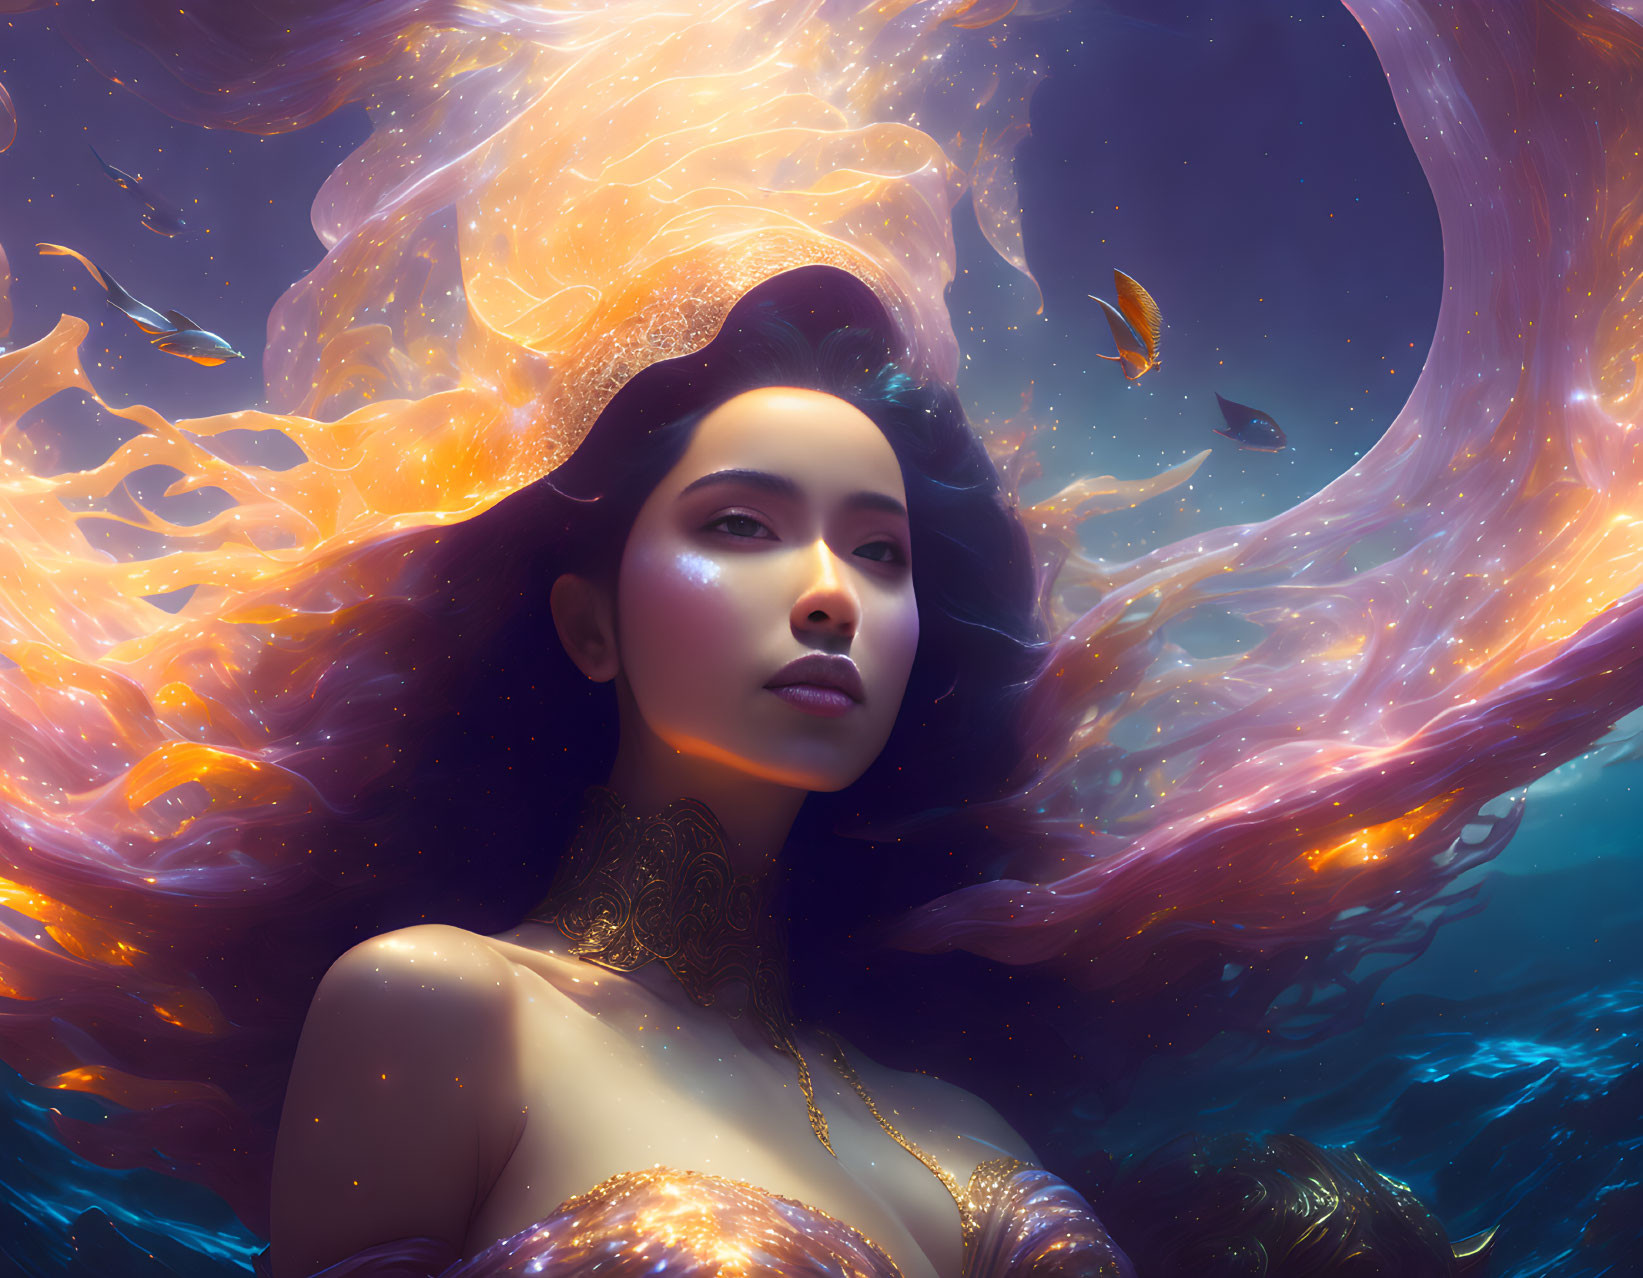 Ethereal woman submerged in vibrant orange and gold swirls